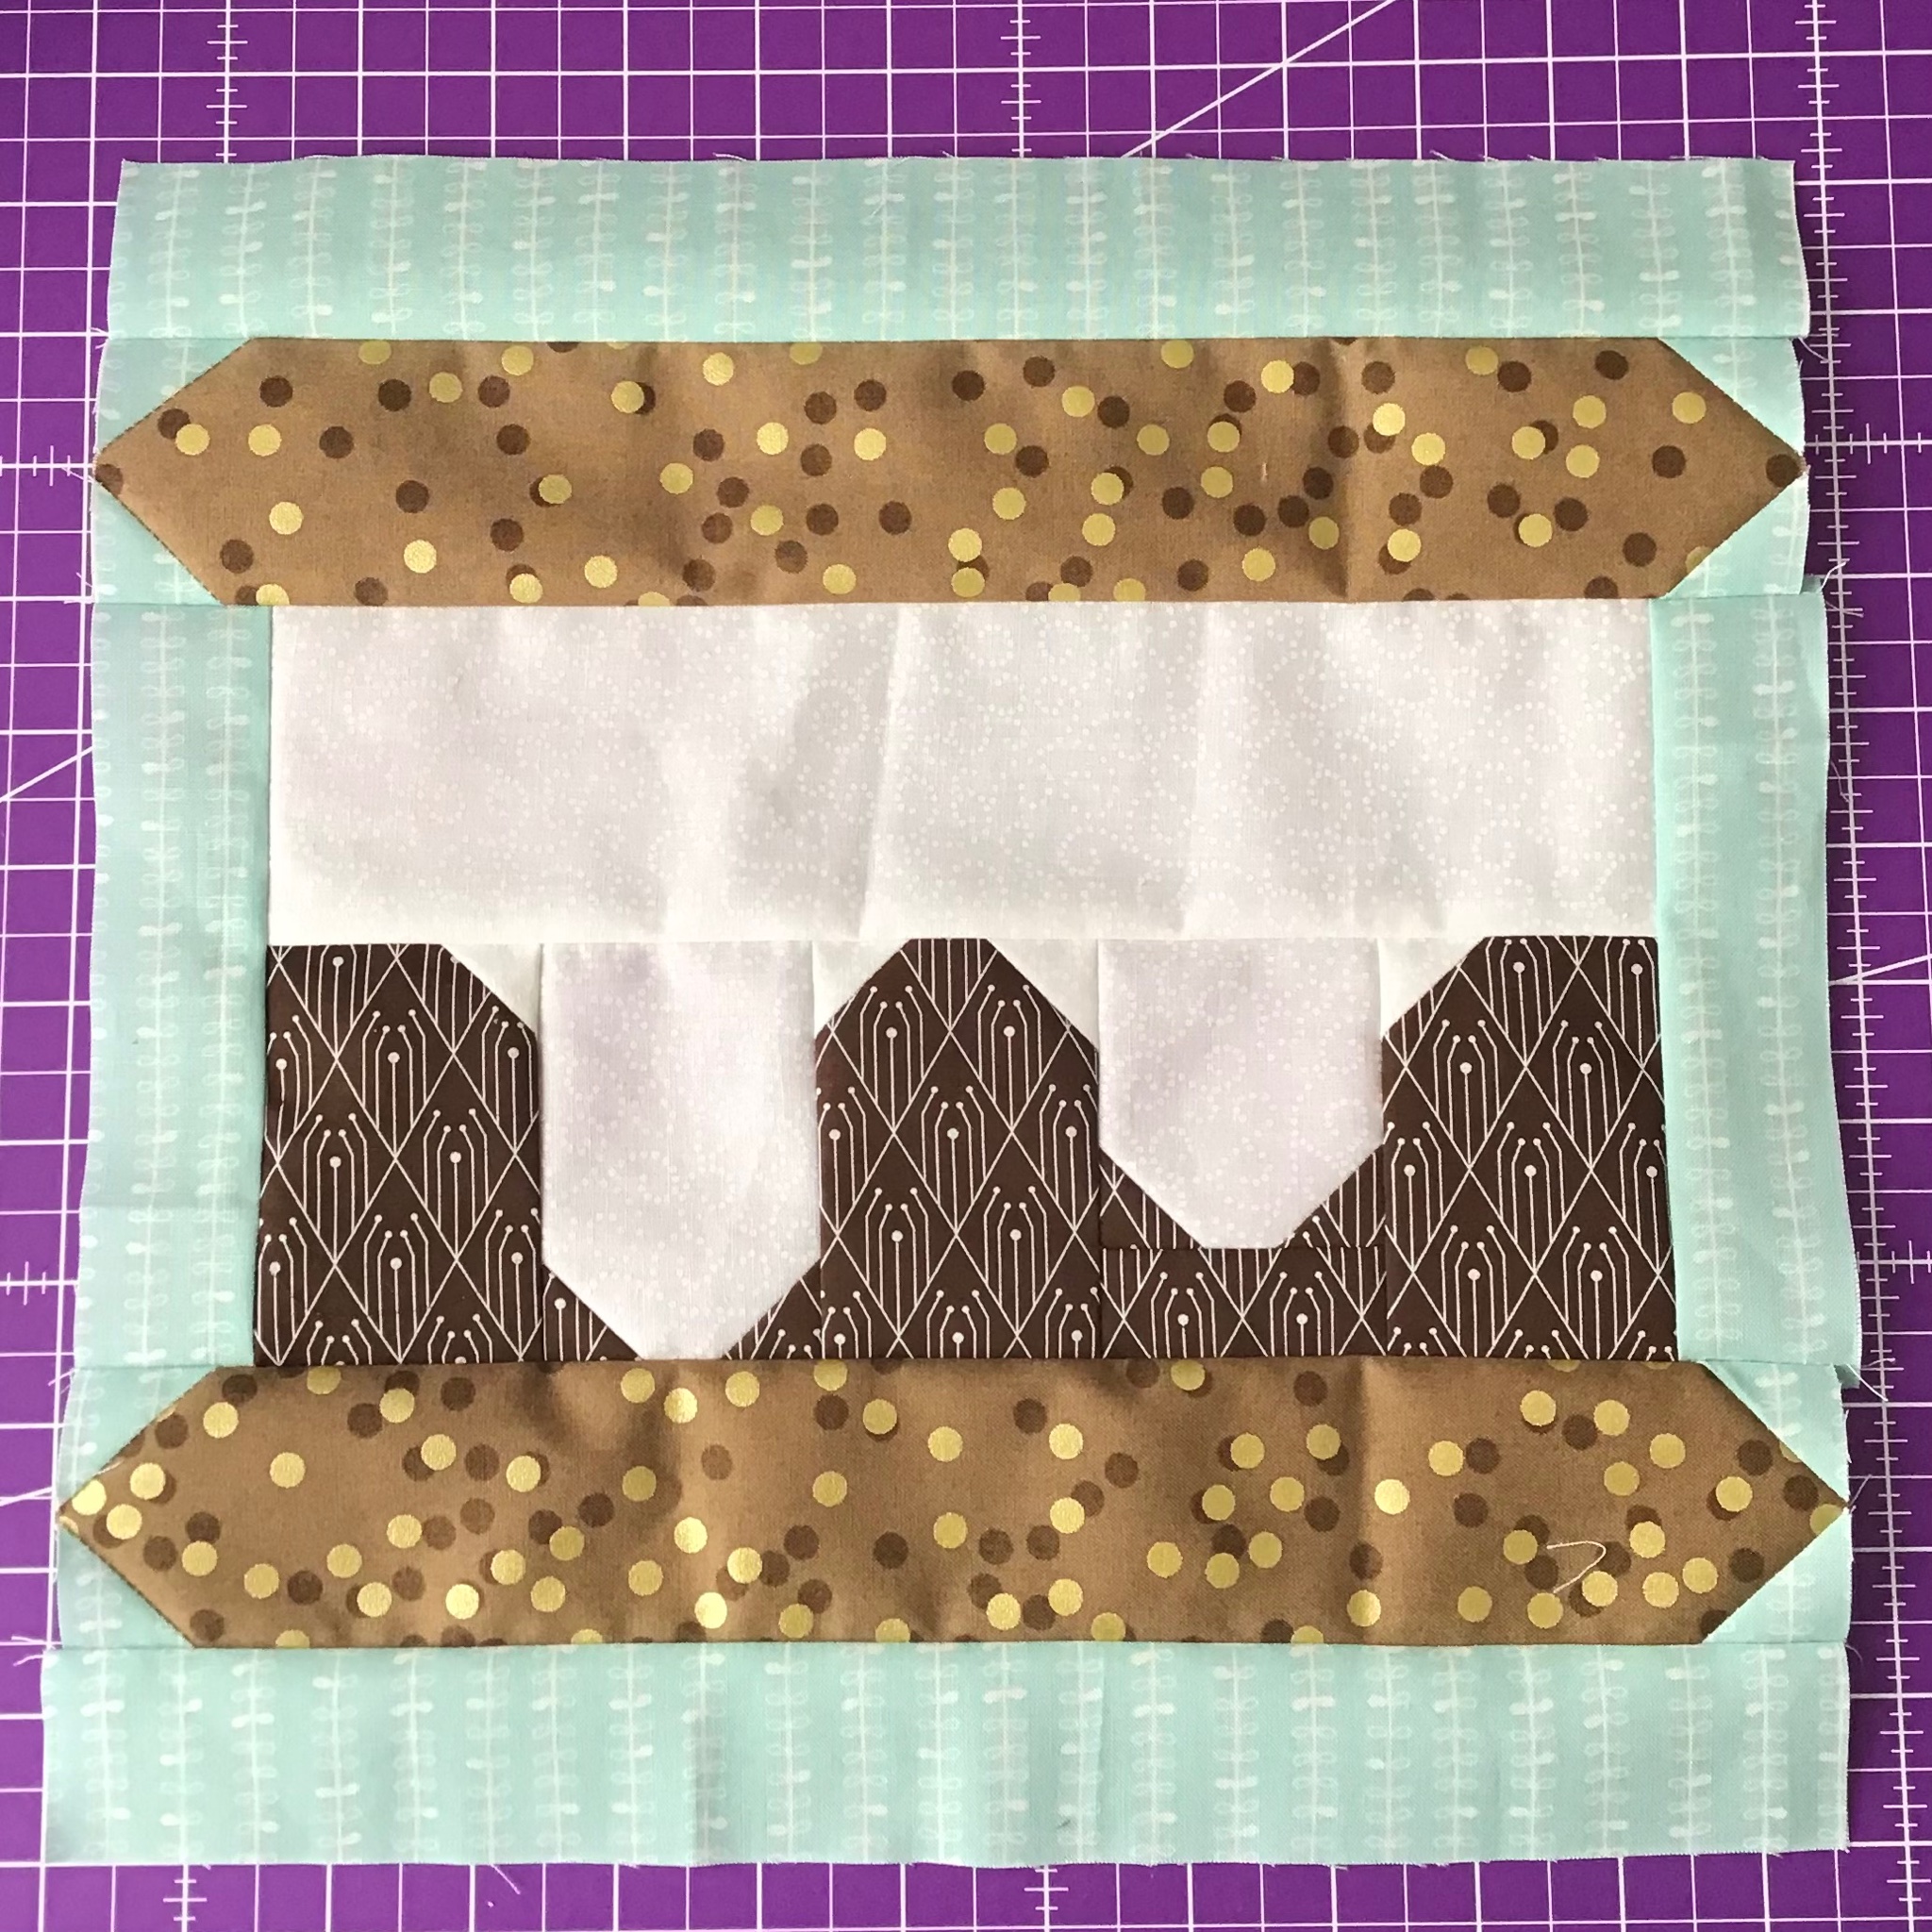 S'more quilt pattern - Camping quilt patterns